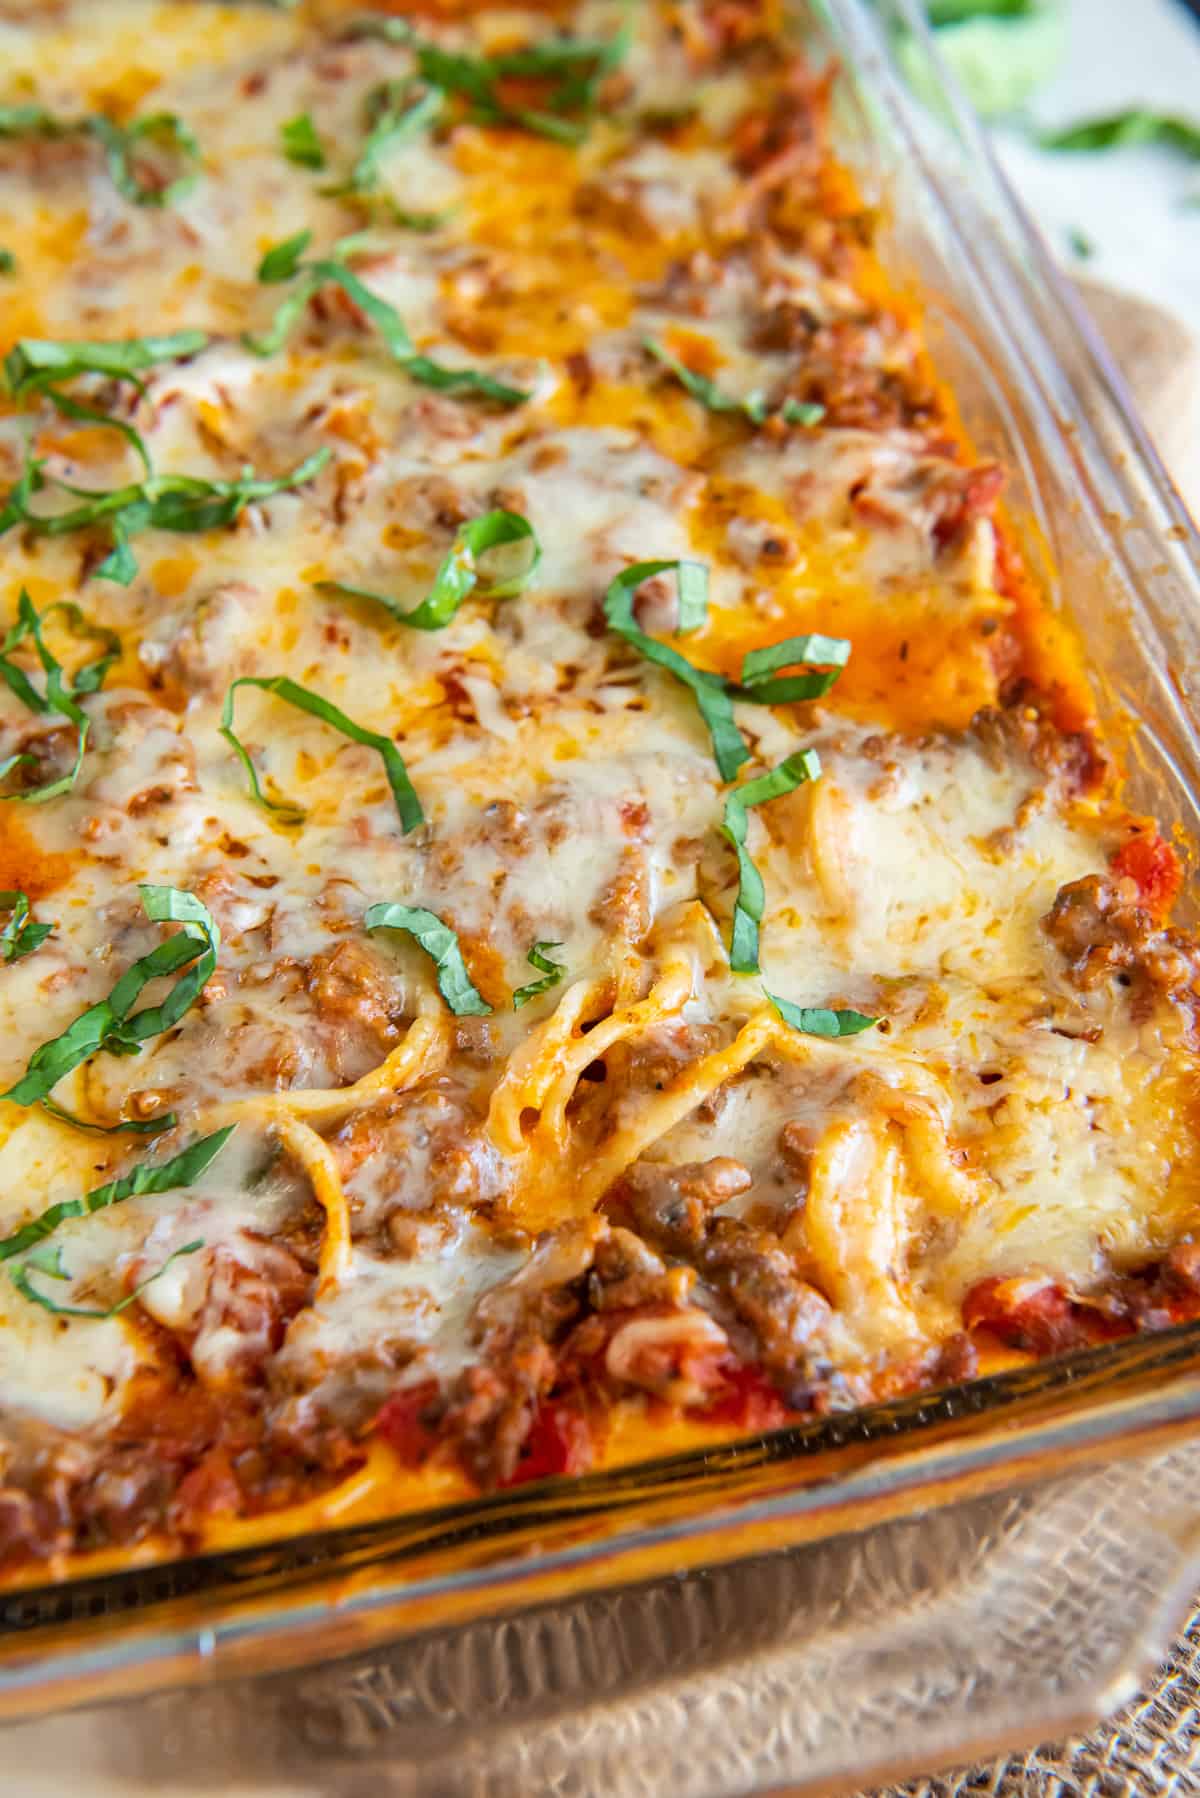 A close up of spaghetti casserole with ricotta cheese in a baking dish.